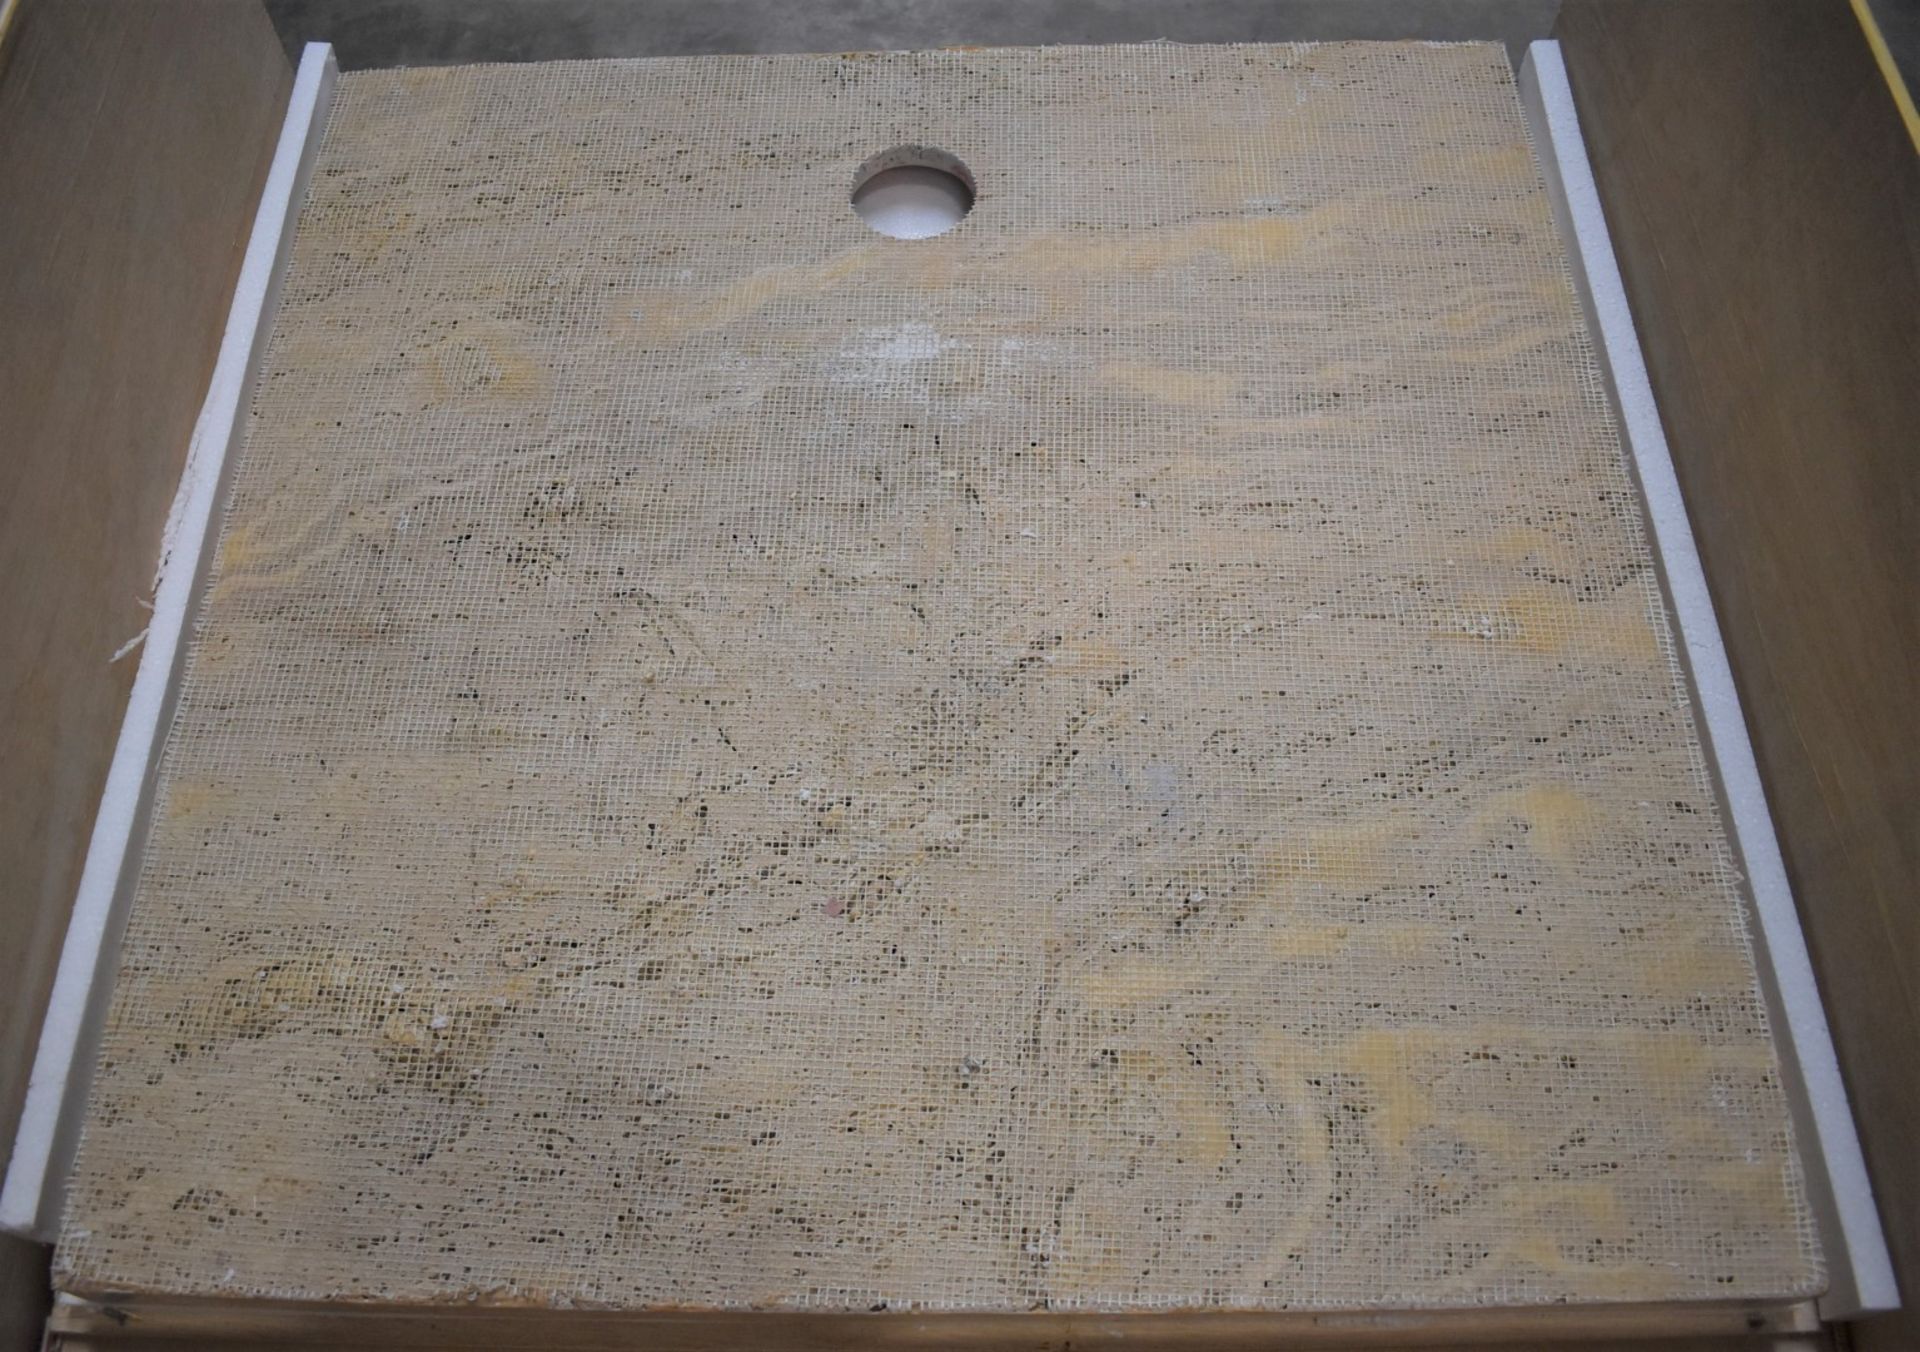 1 x Stonearth Luxury Solid Travertine Stone 900mm Shower Tray - Hand Made From Travertine Stone - Image 3 of 12